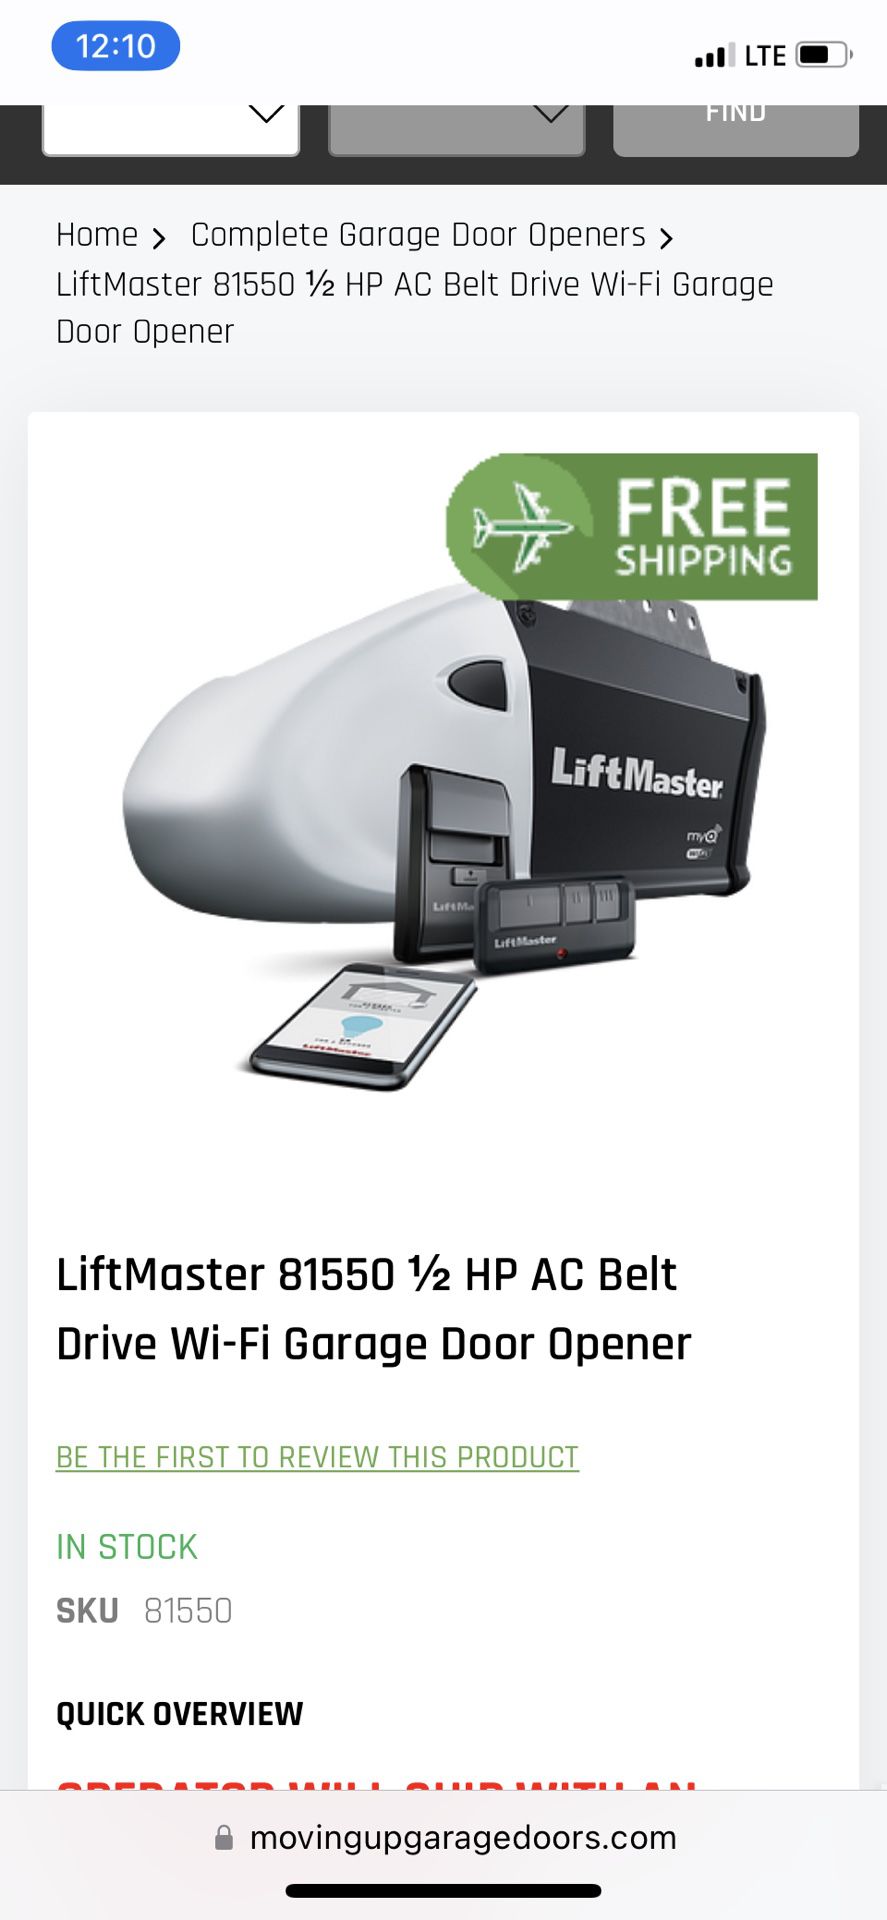 Liftmaster 8155 $300 includes installation